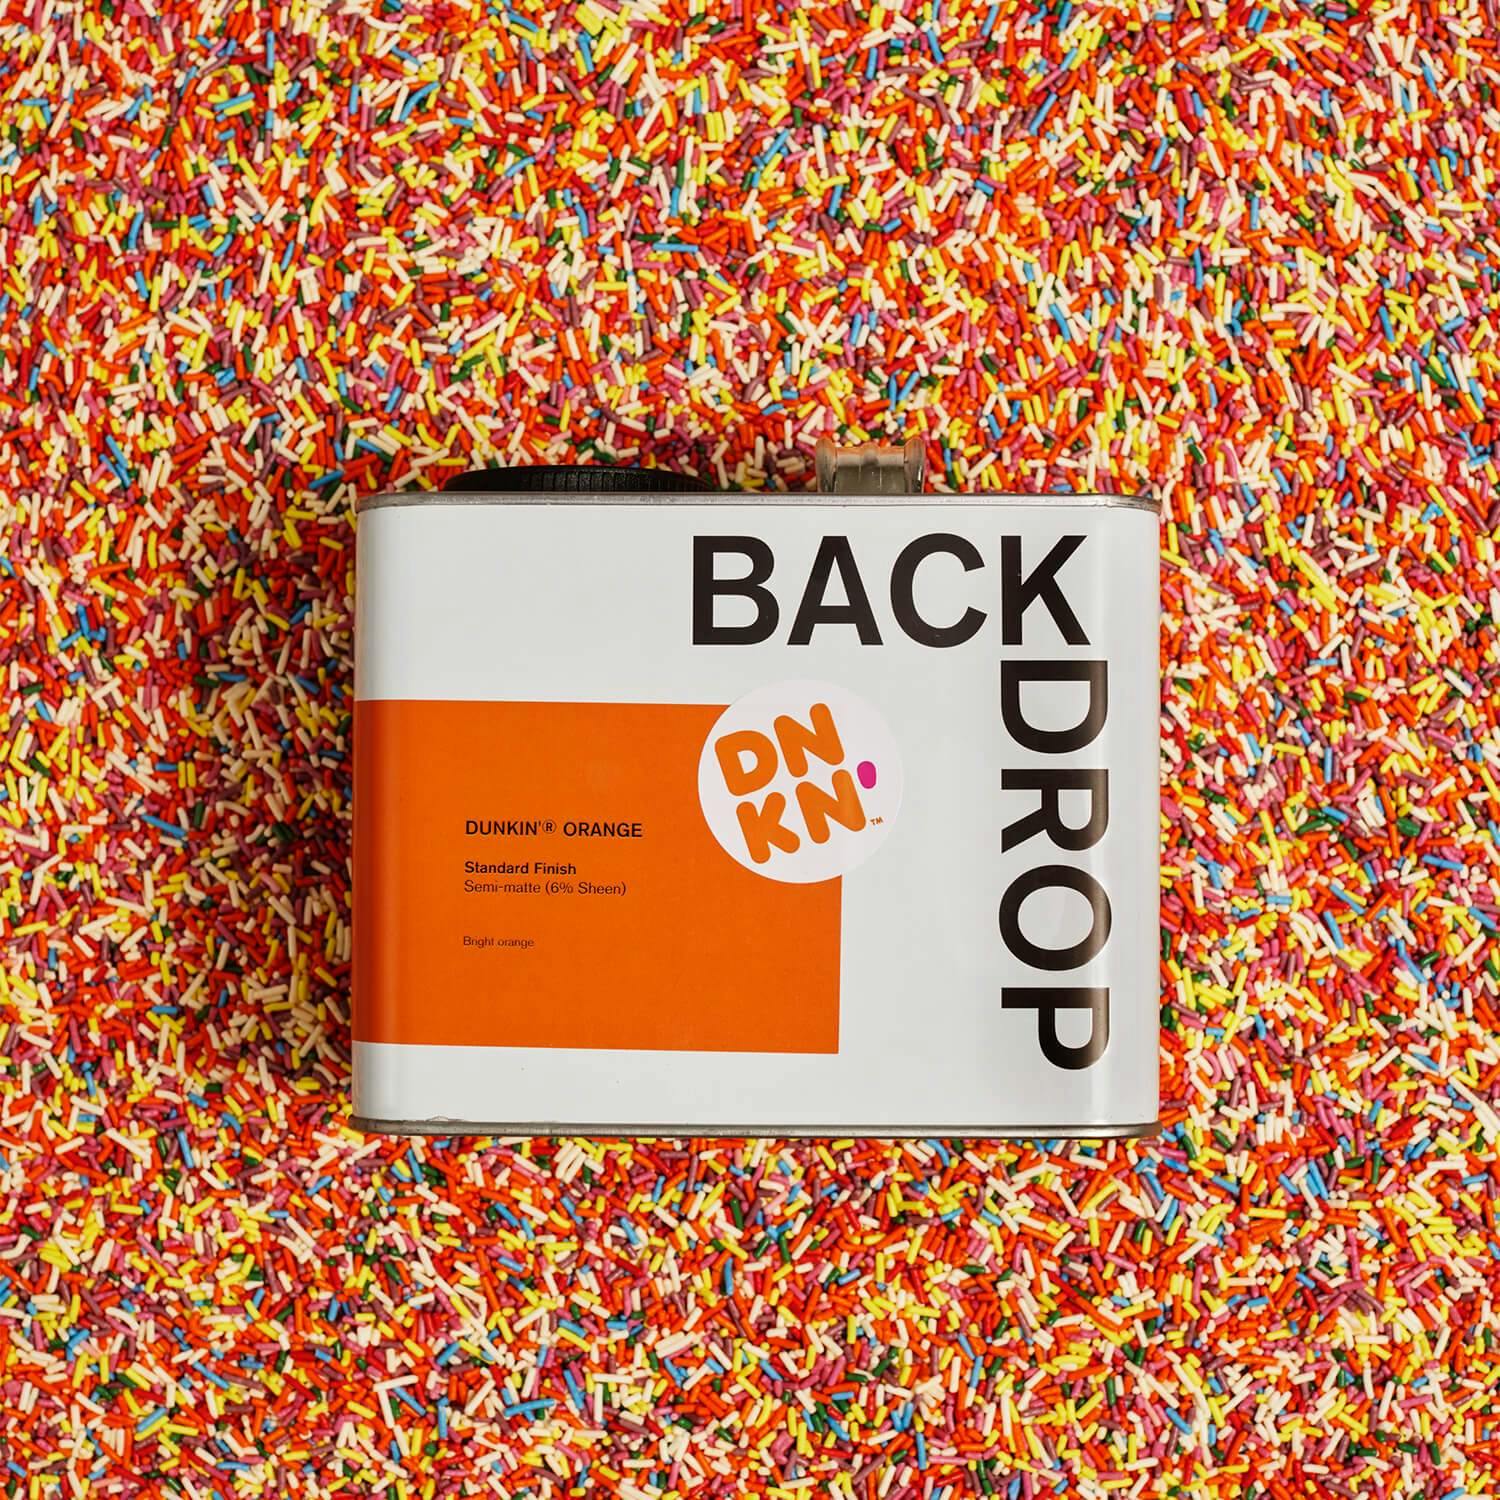 Dunkin'®  Orange paint can on a bed of colorful sprinkles